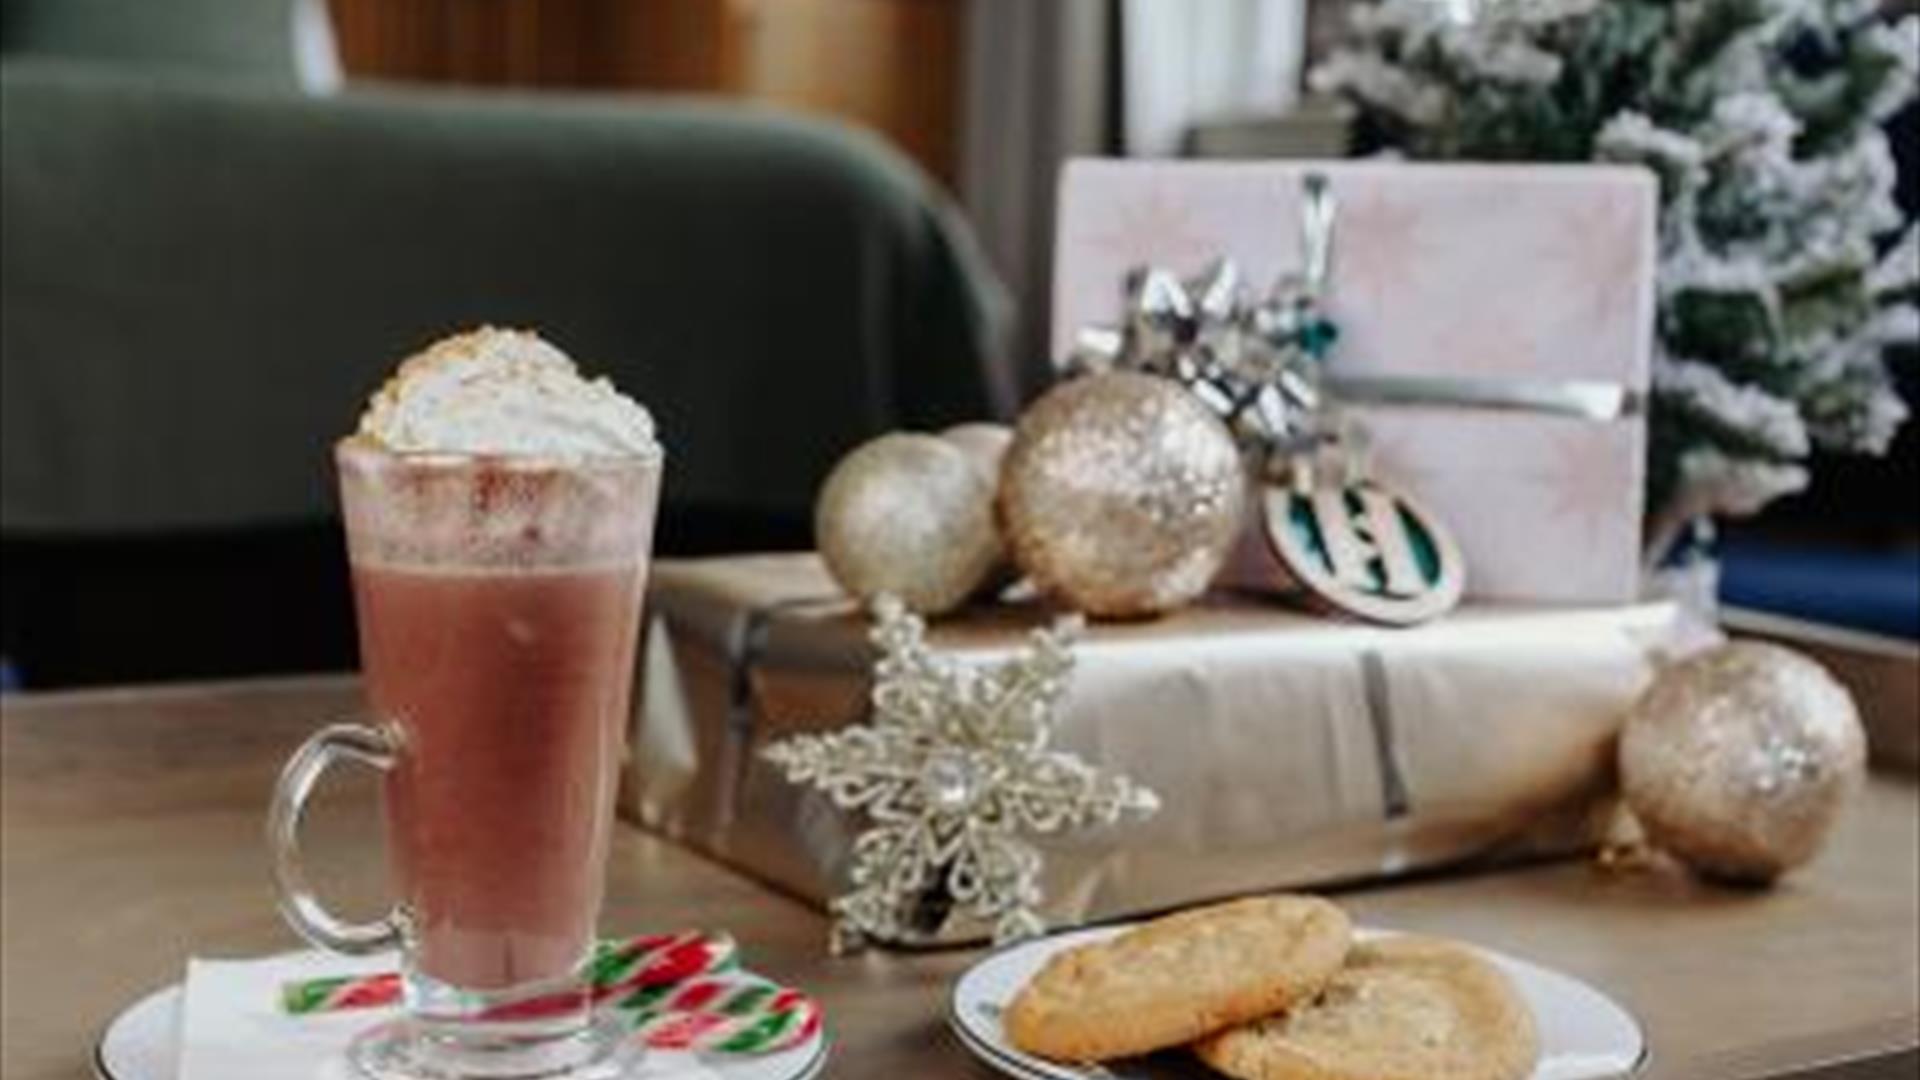 Image shows room in Haslem Hotel with dark green colours with silver wrapped presents and an image of a Christmas latte with peppermint stick and a pl